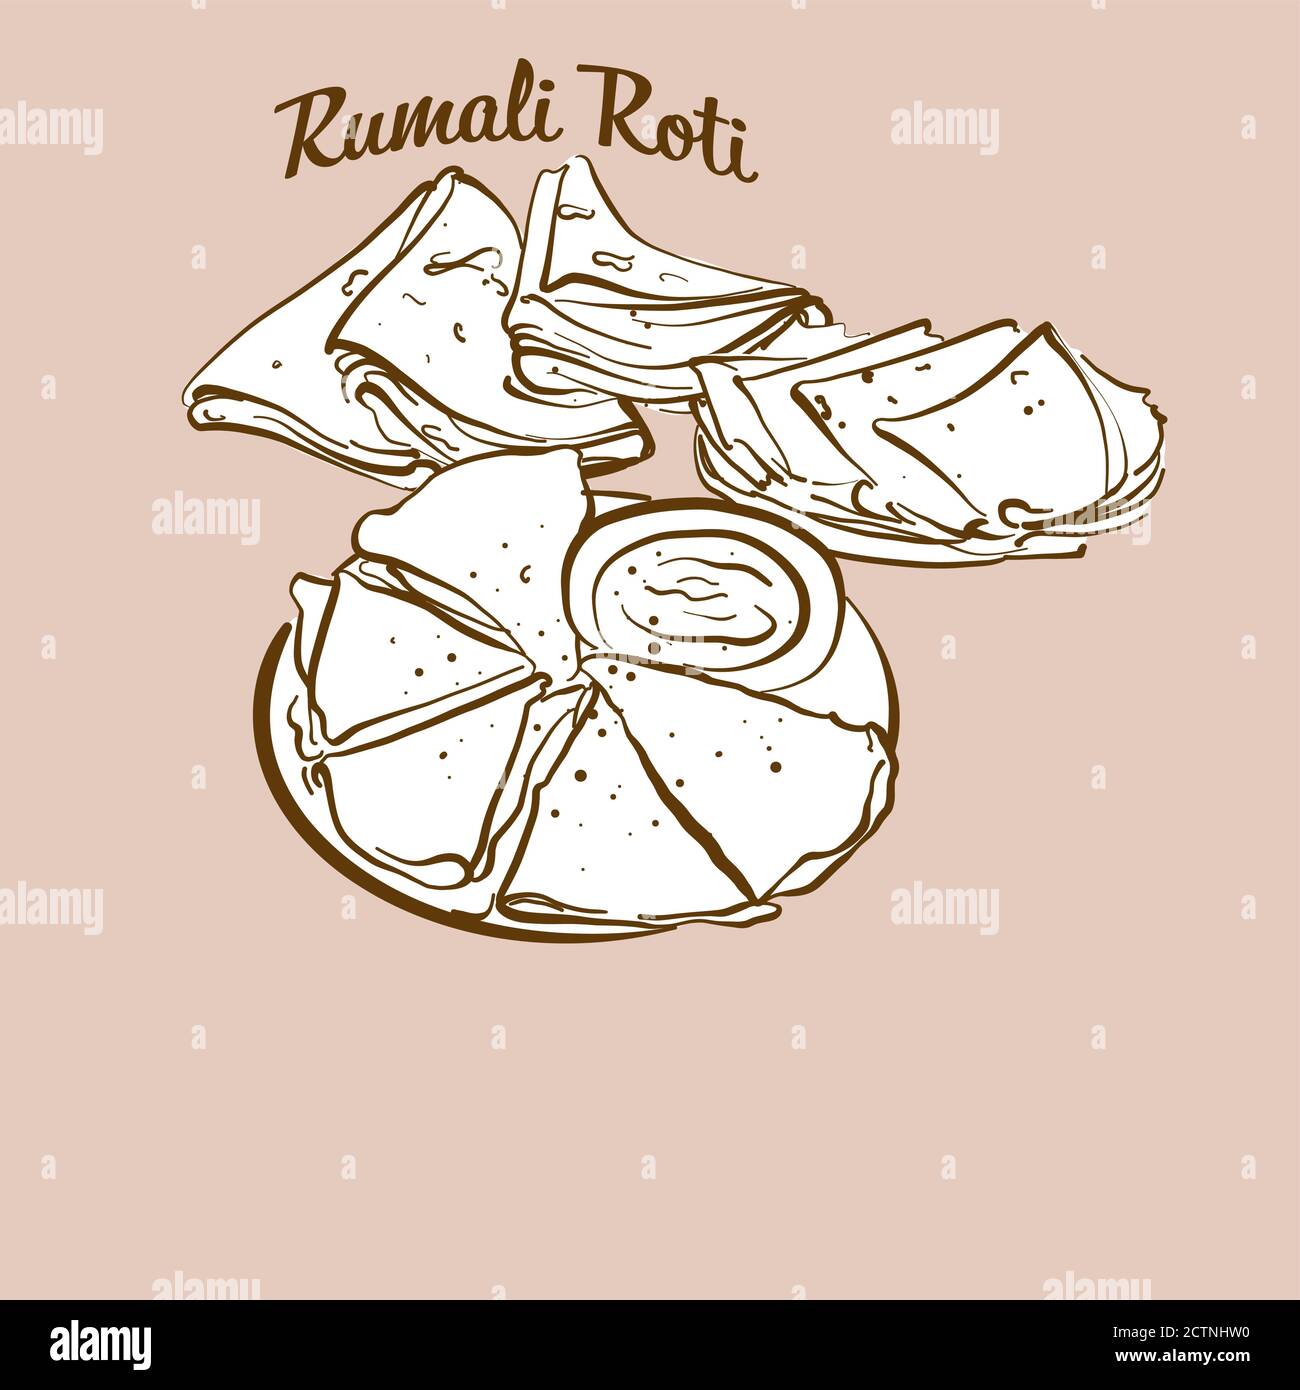 Hand-drawn Rumali Roti bread illustration. Flatbread, usually known in India. Vector drawing series. Stock Vector